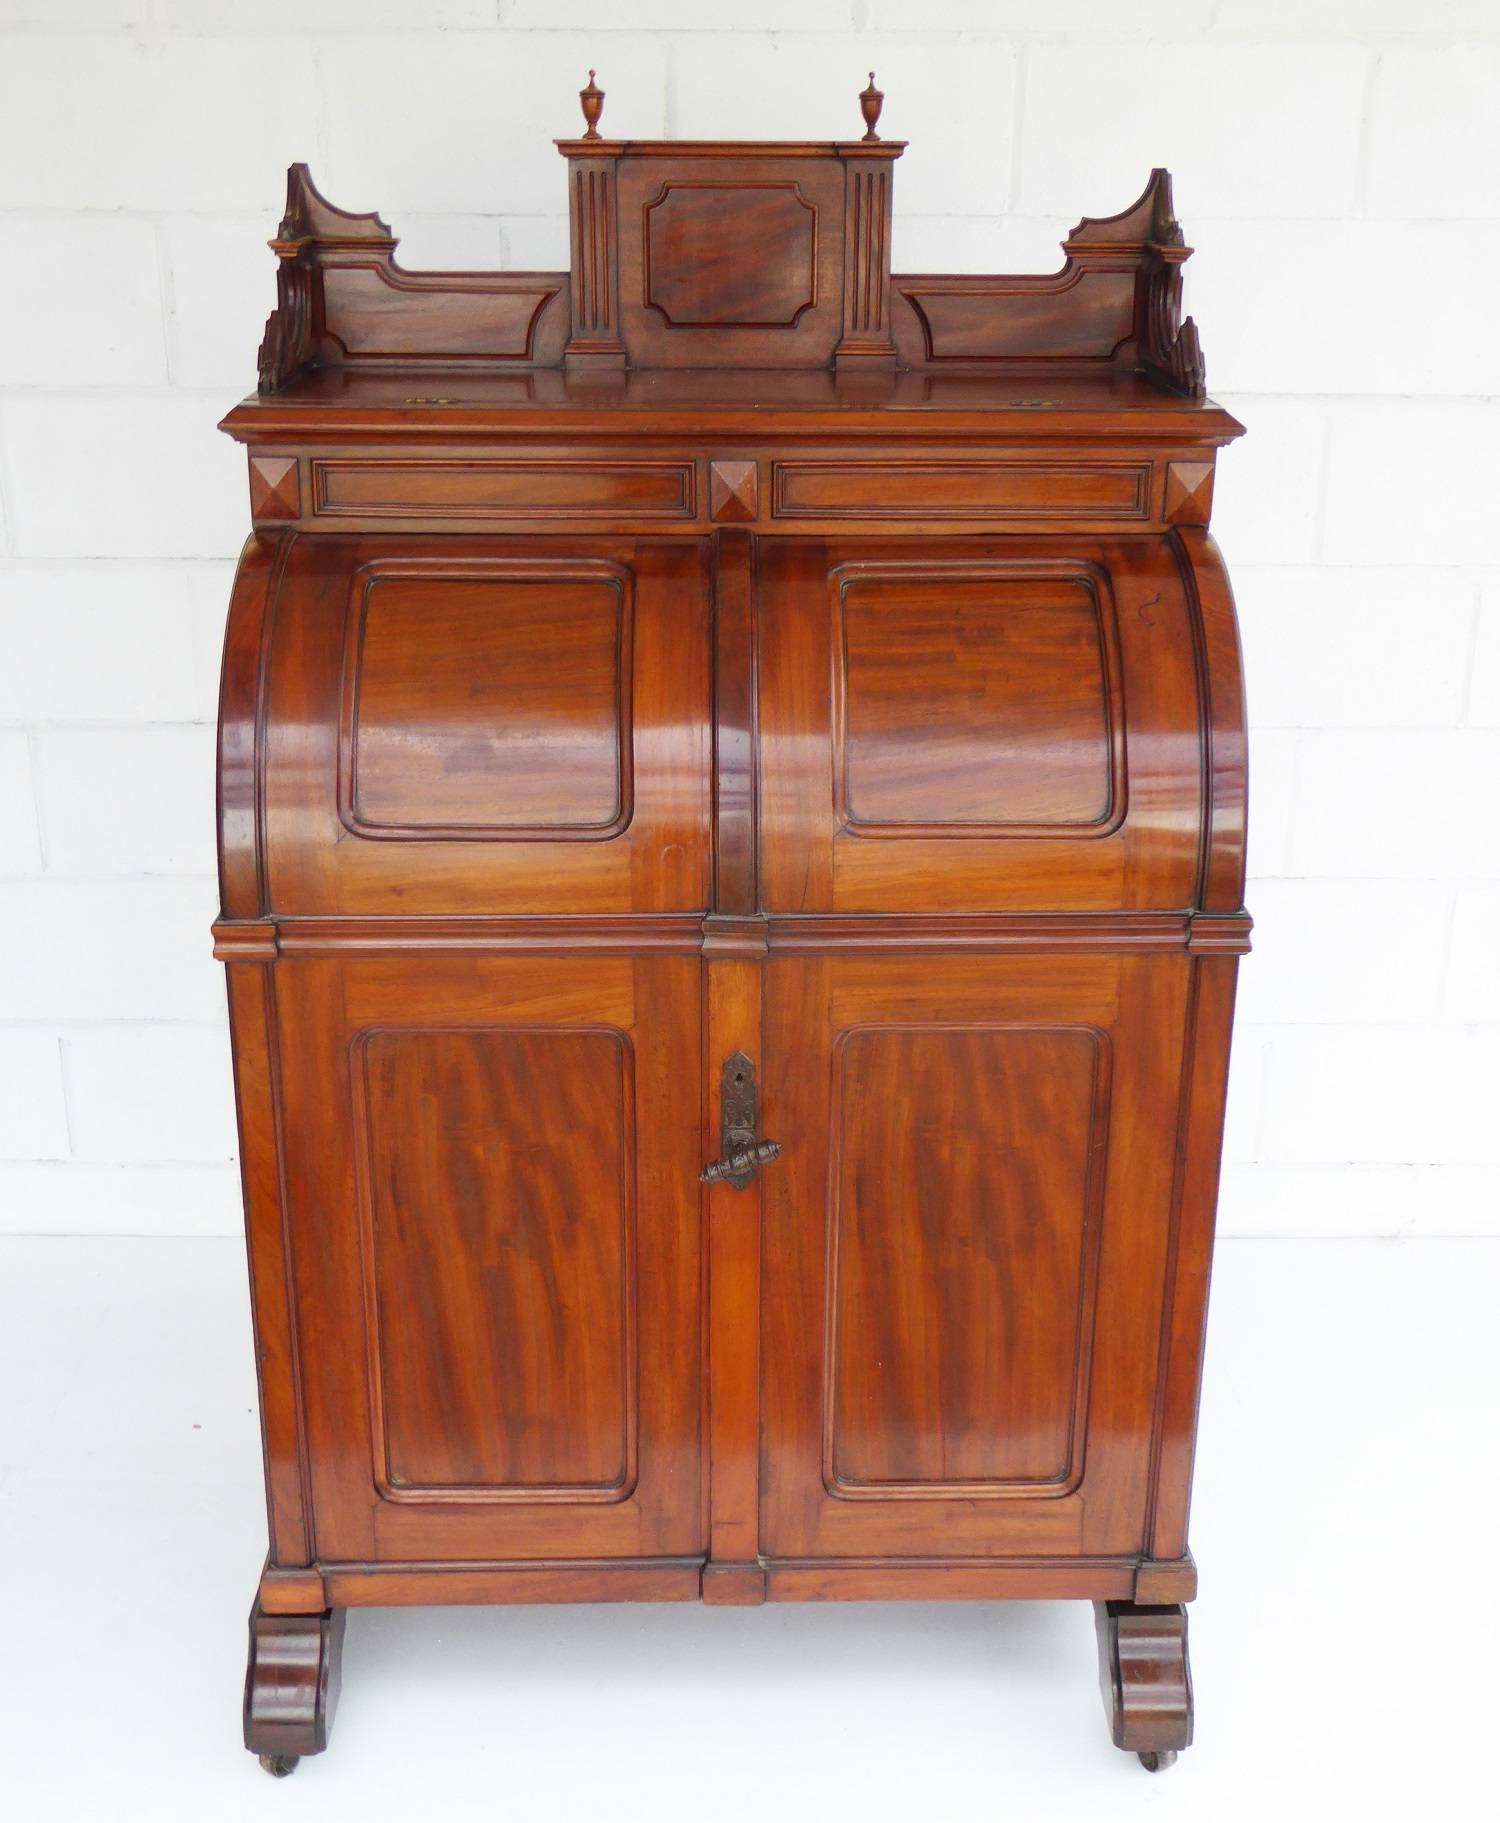 Selling is a rare American Wooton desk ,the desk when opened reveals a pull down writing fall ,this when opened reveals four small drawers several small and large pigeon holes ,below the fall it has four larger drawers and several more spaces for